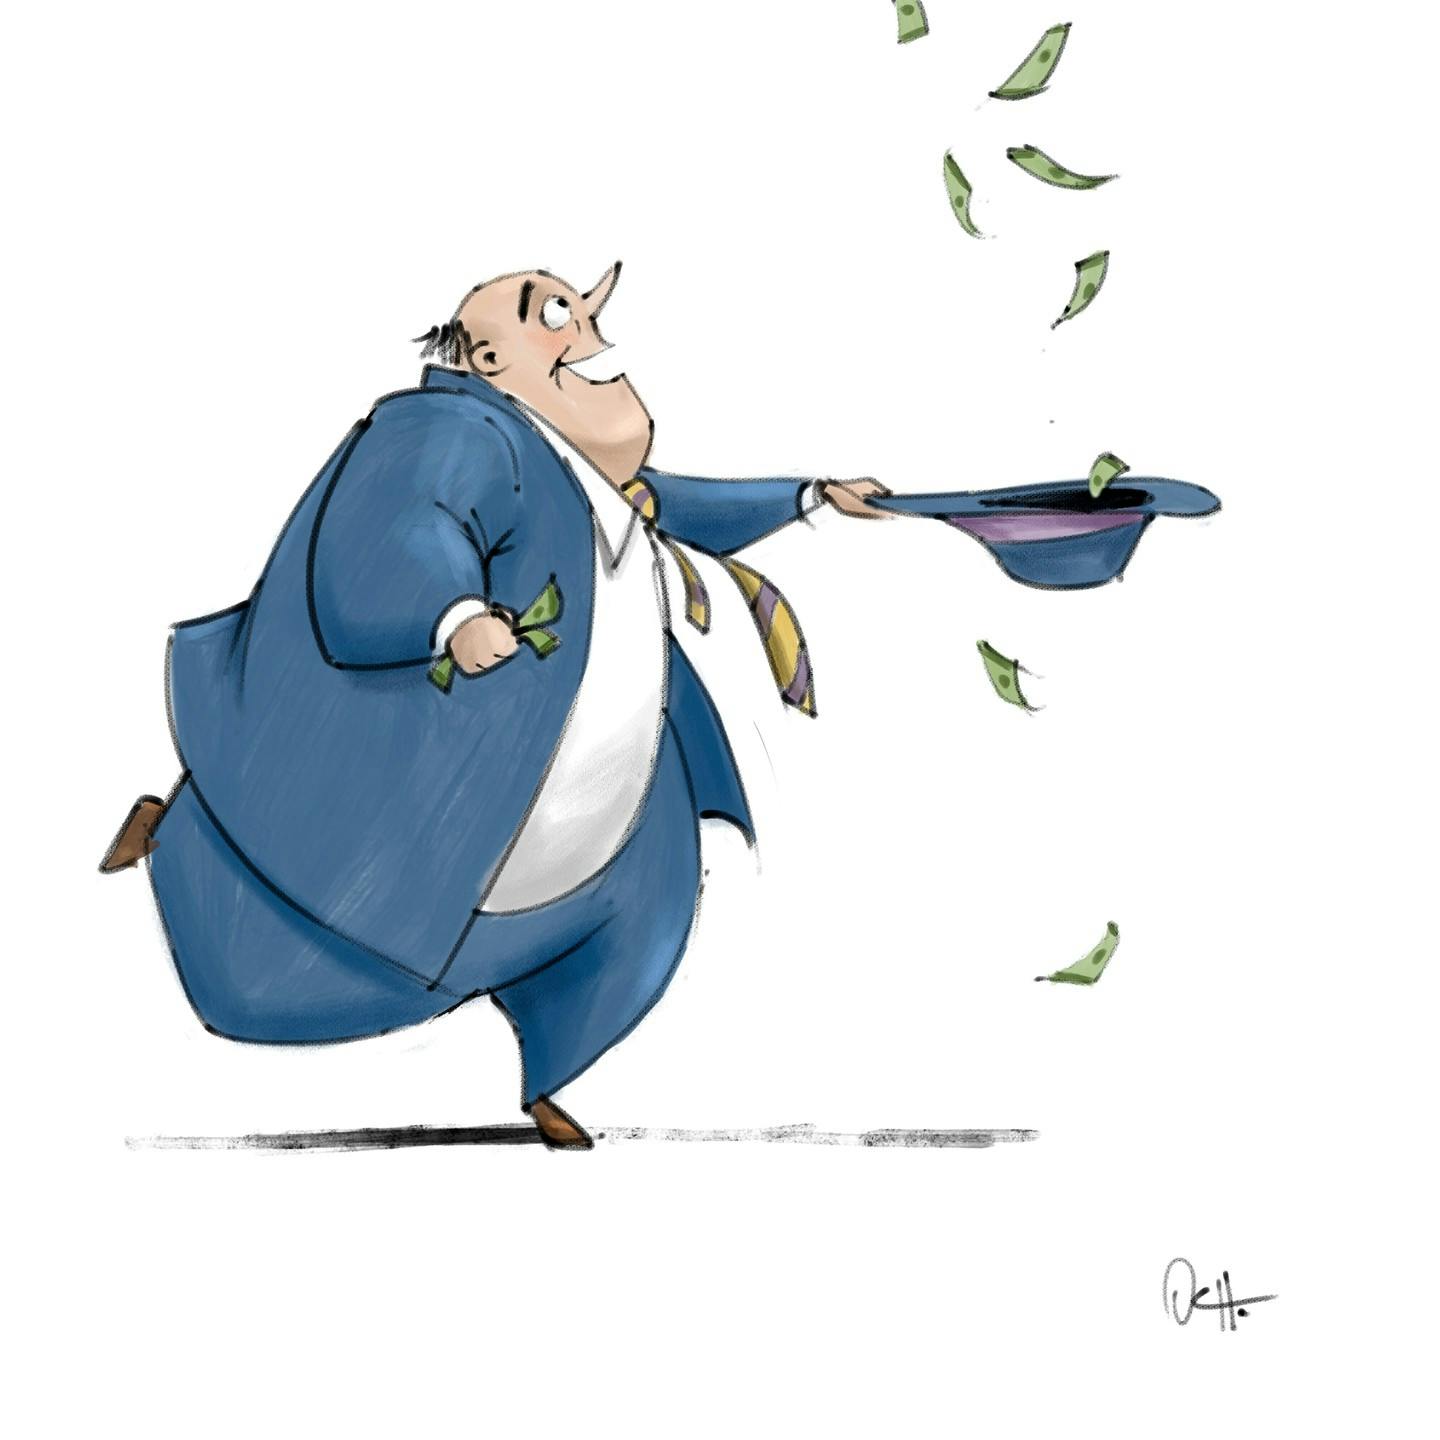 Illustration of a man catching dollars in his hat